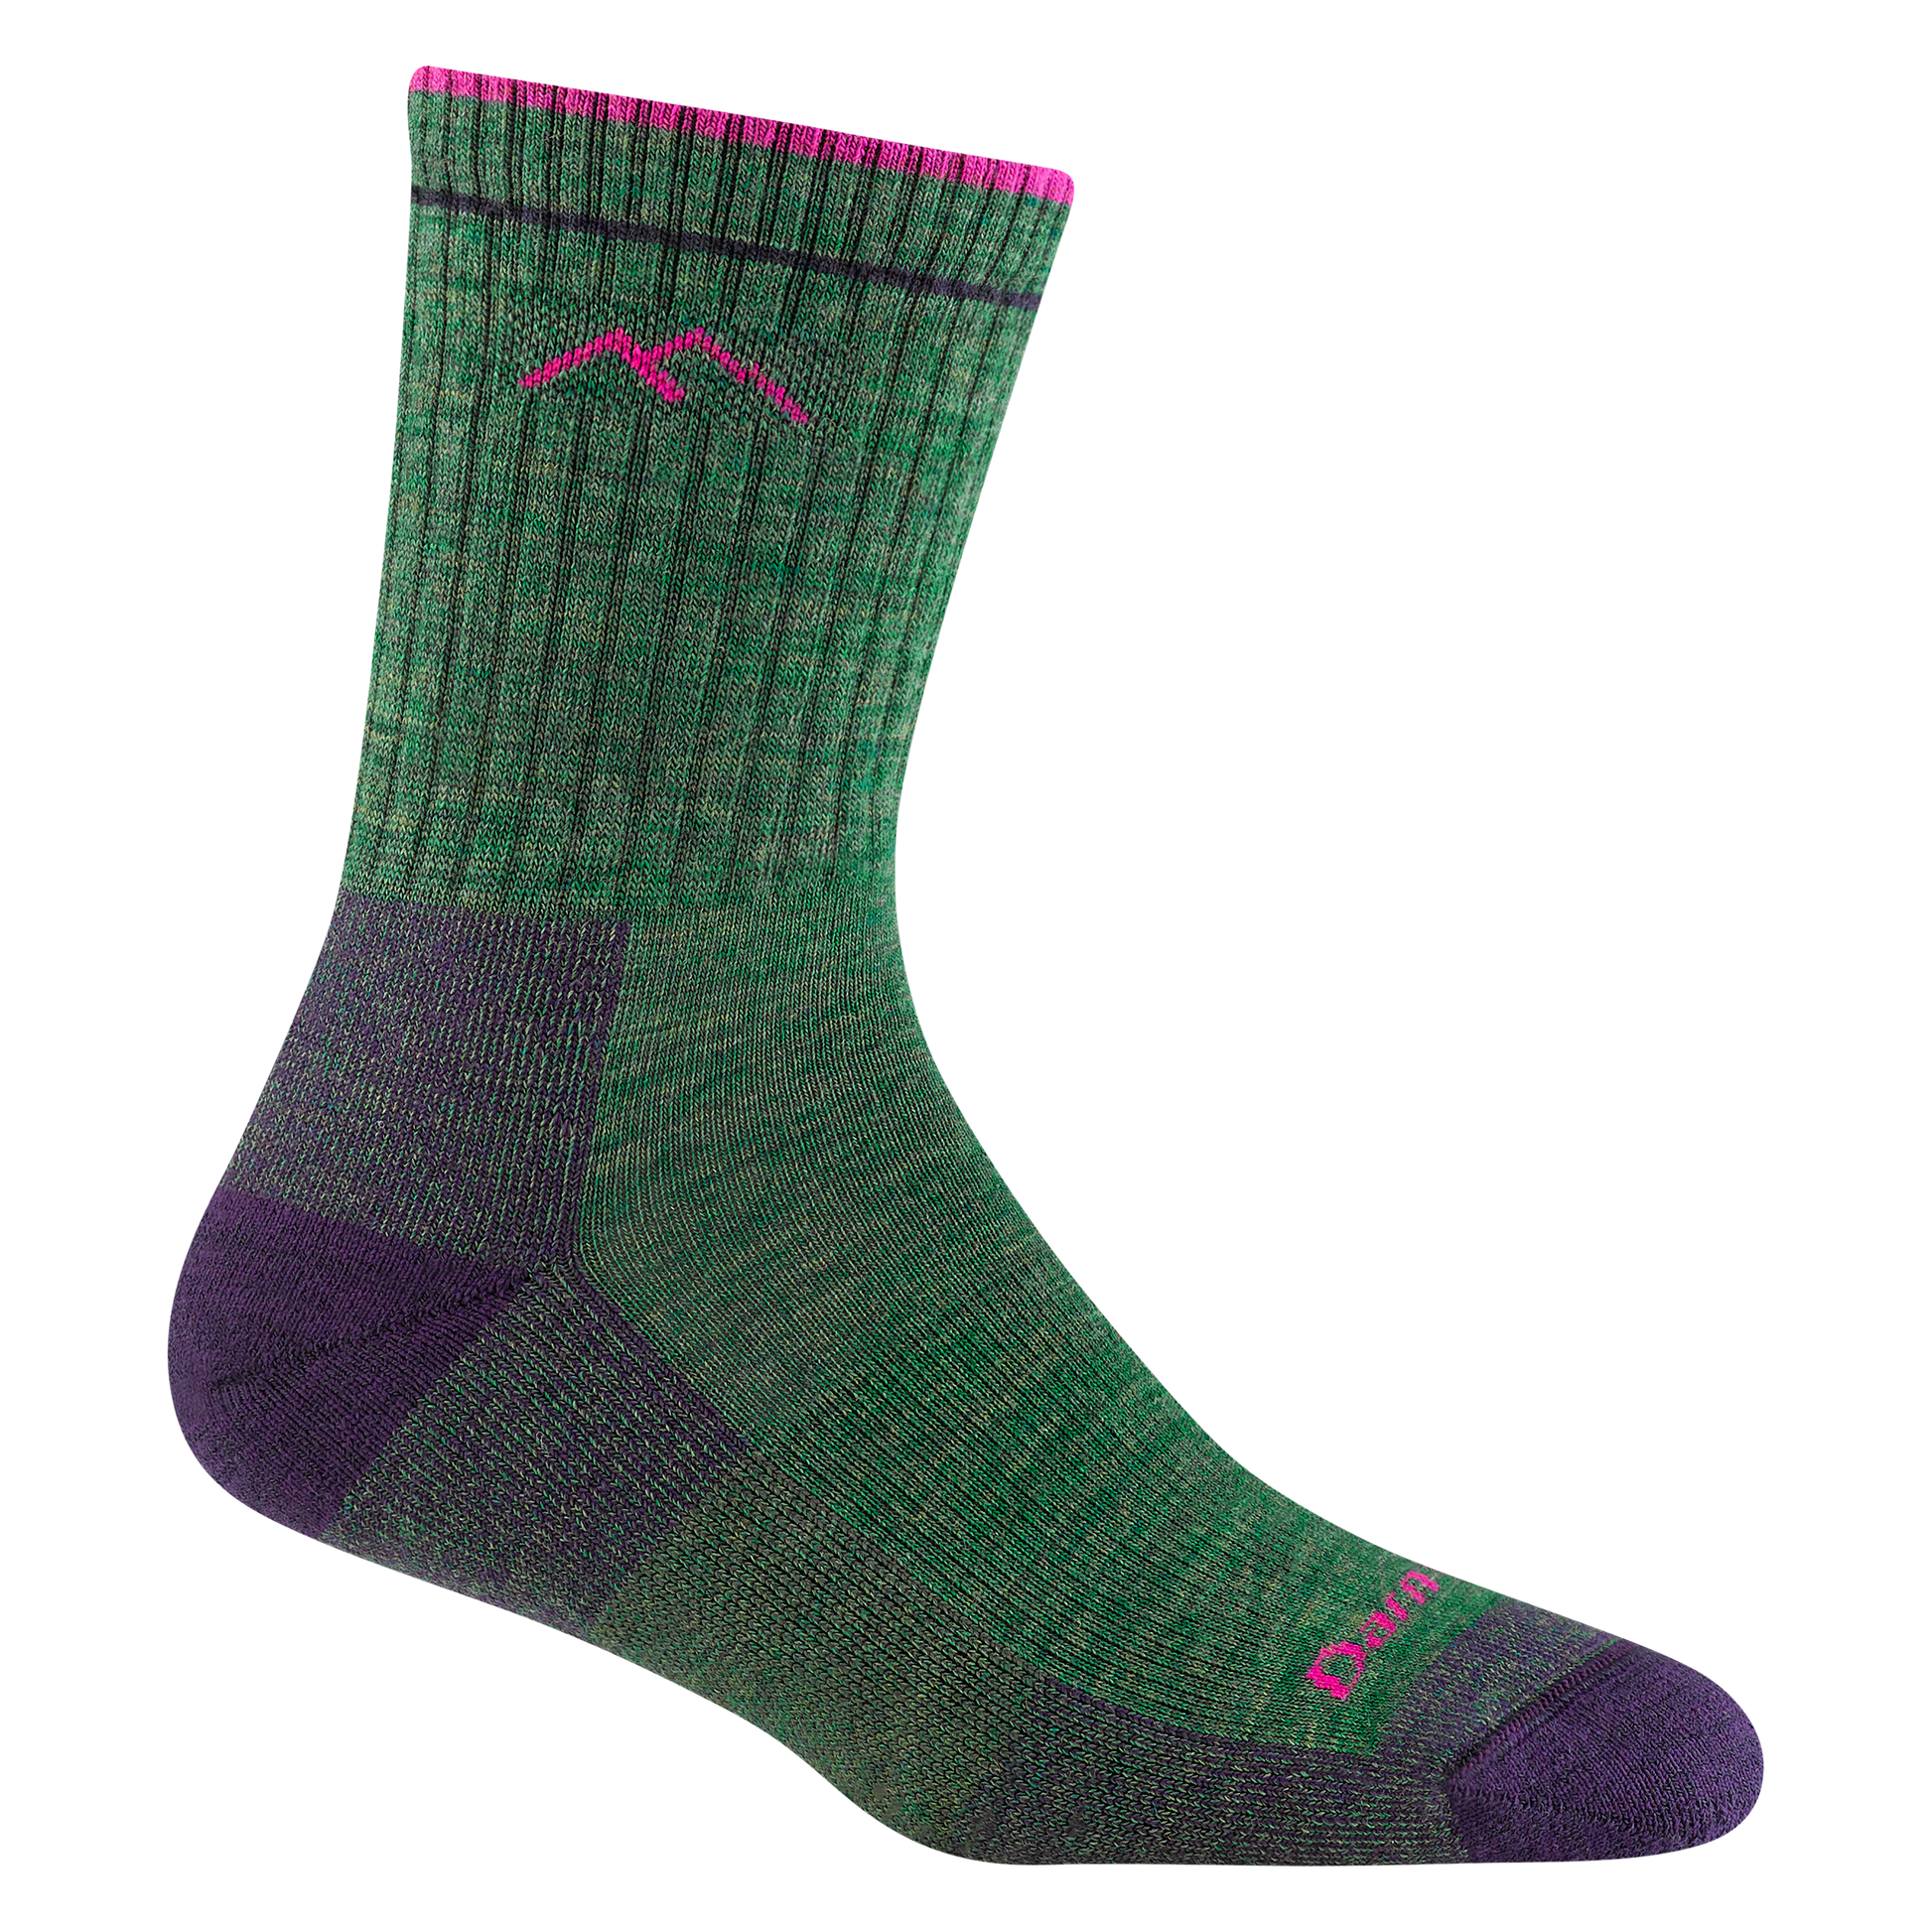 Darn tough moss green sock with pink mountain outline detail, purple toe and heel